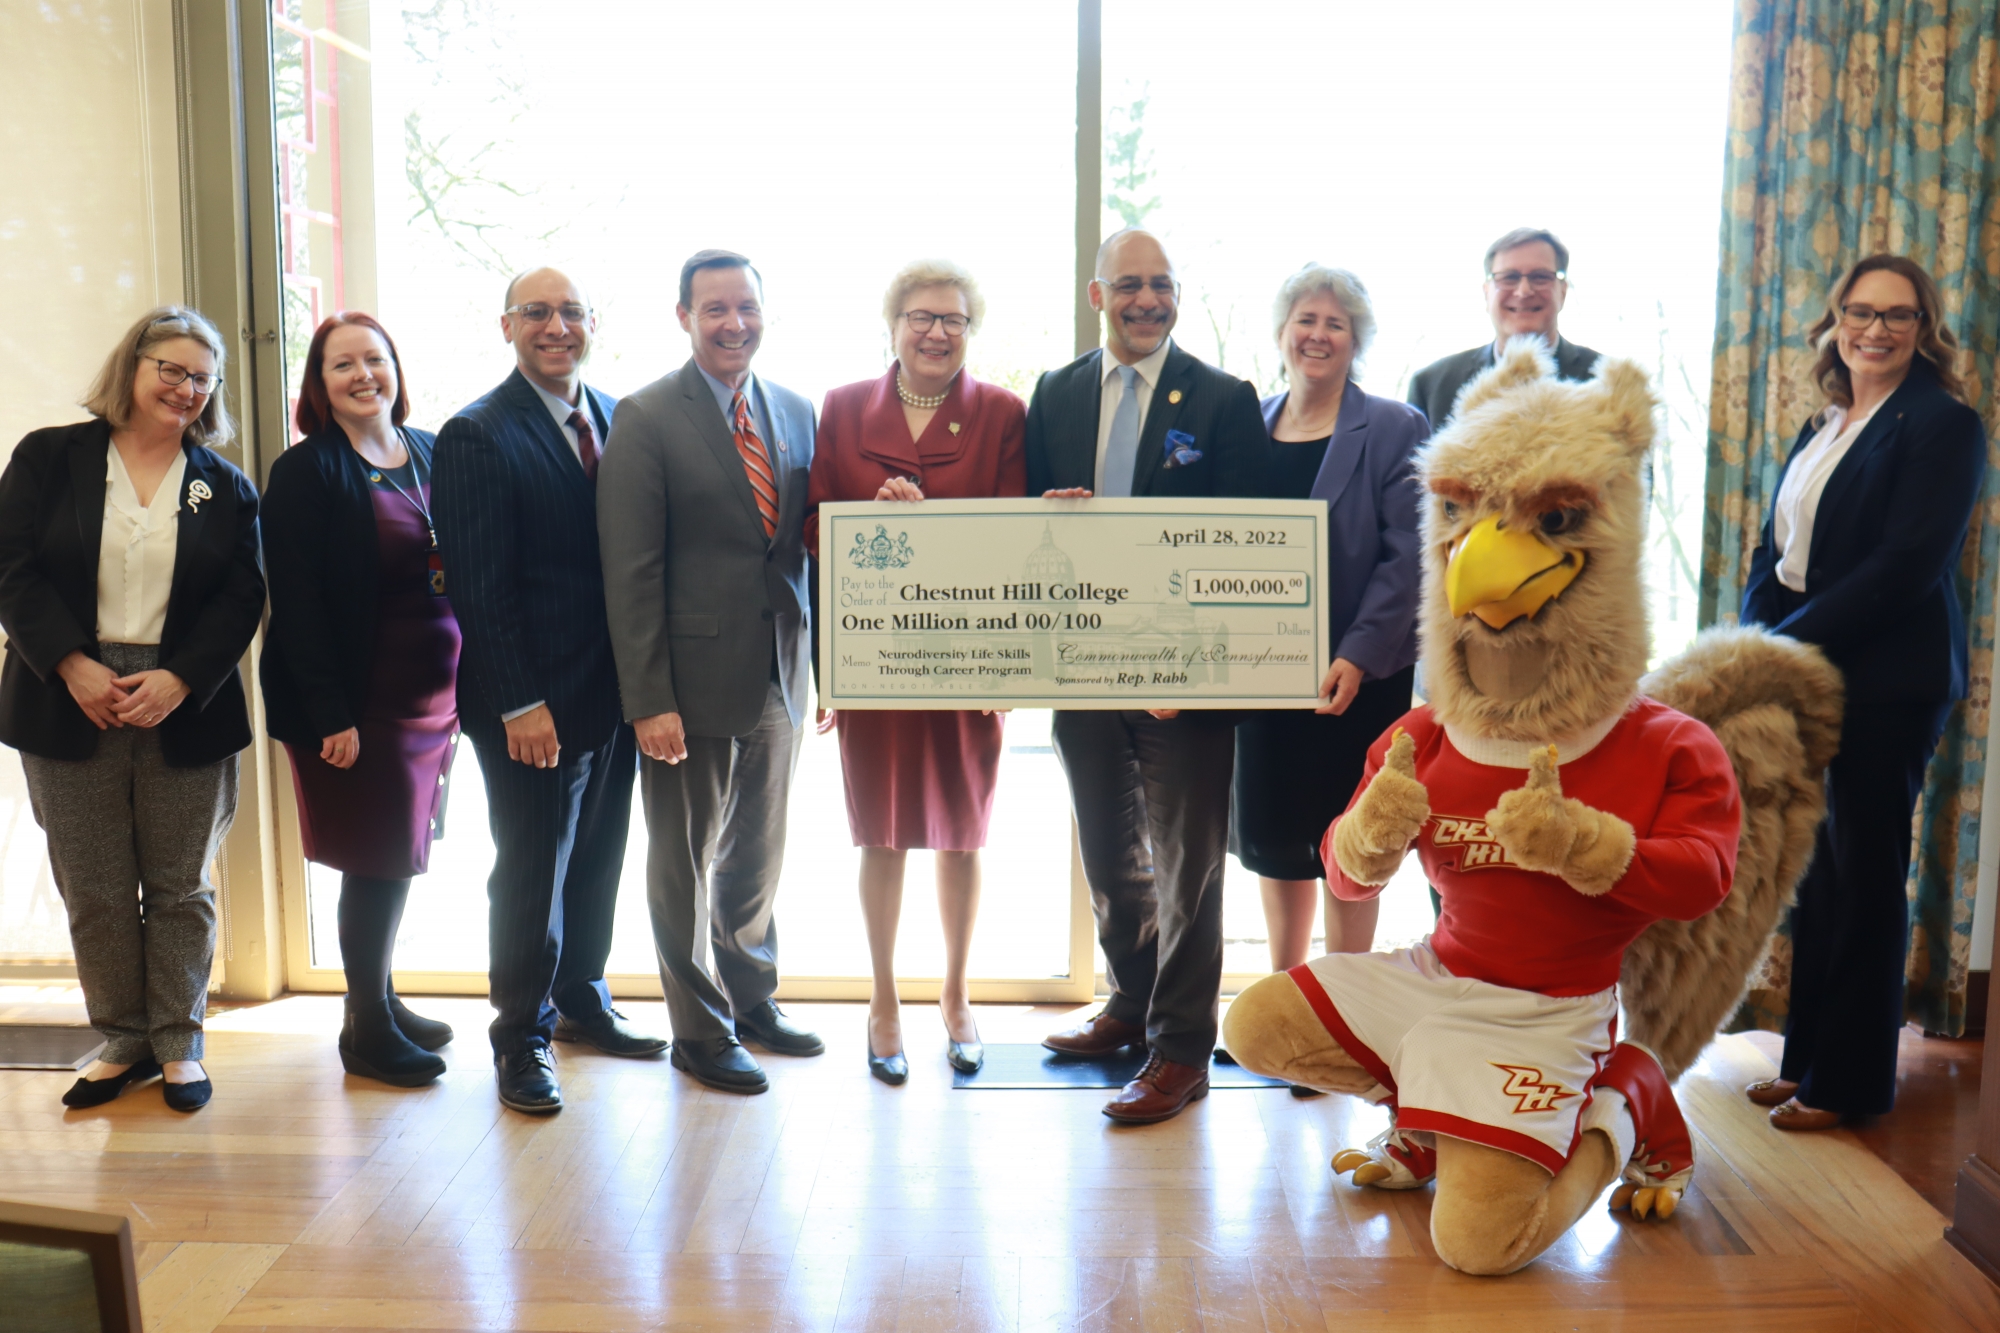 Members of the Neurodiversity Team joined College mascot Big Griff, Sister Carol, and Rep Rabb to celebrate the grant and the opportunities it will provide at an event on April 28th at SugarLoaf.